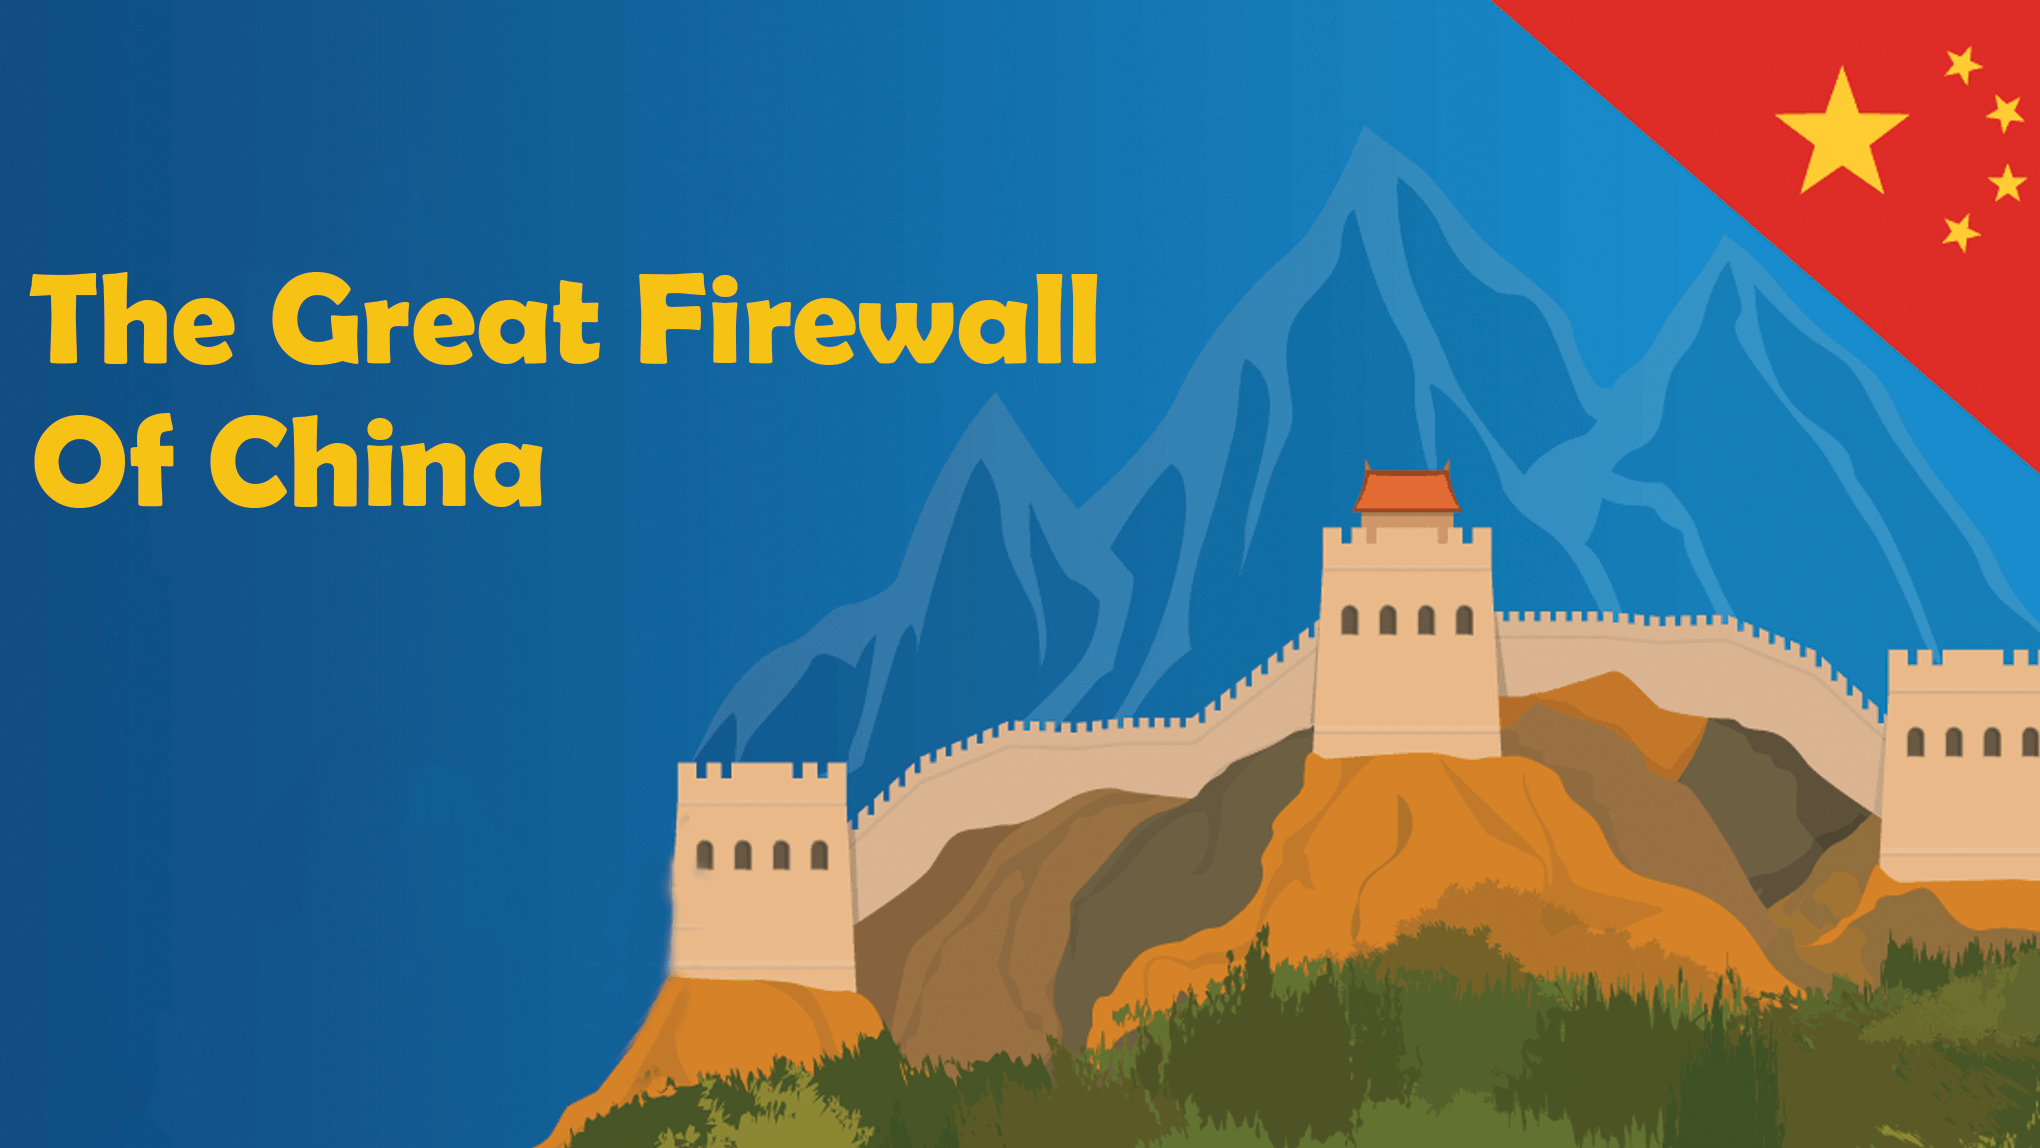 The Great firewall of China